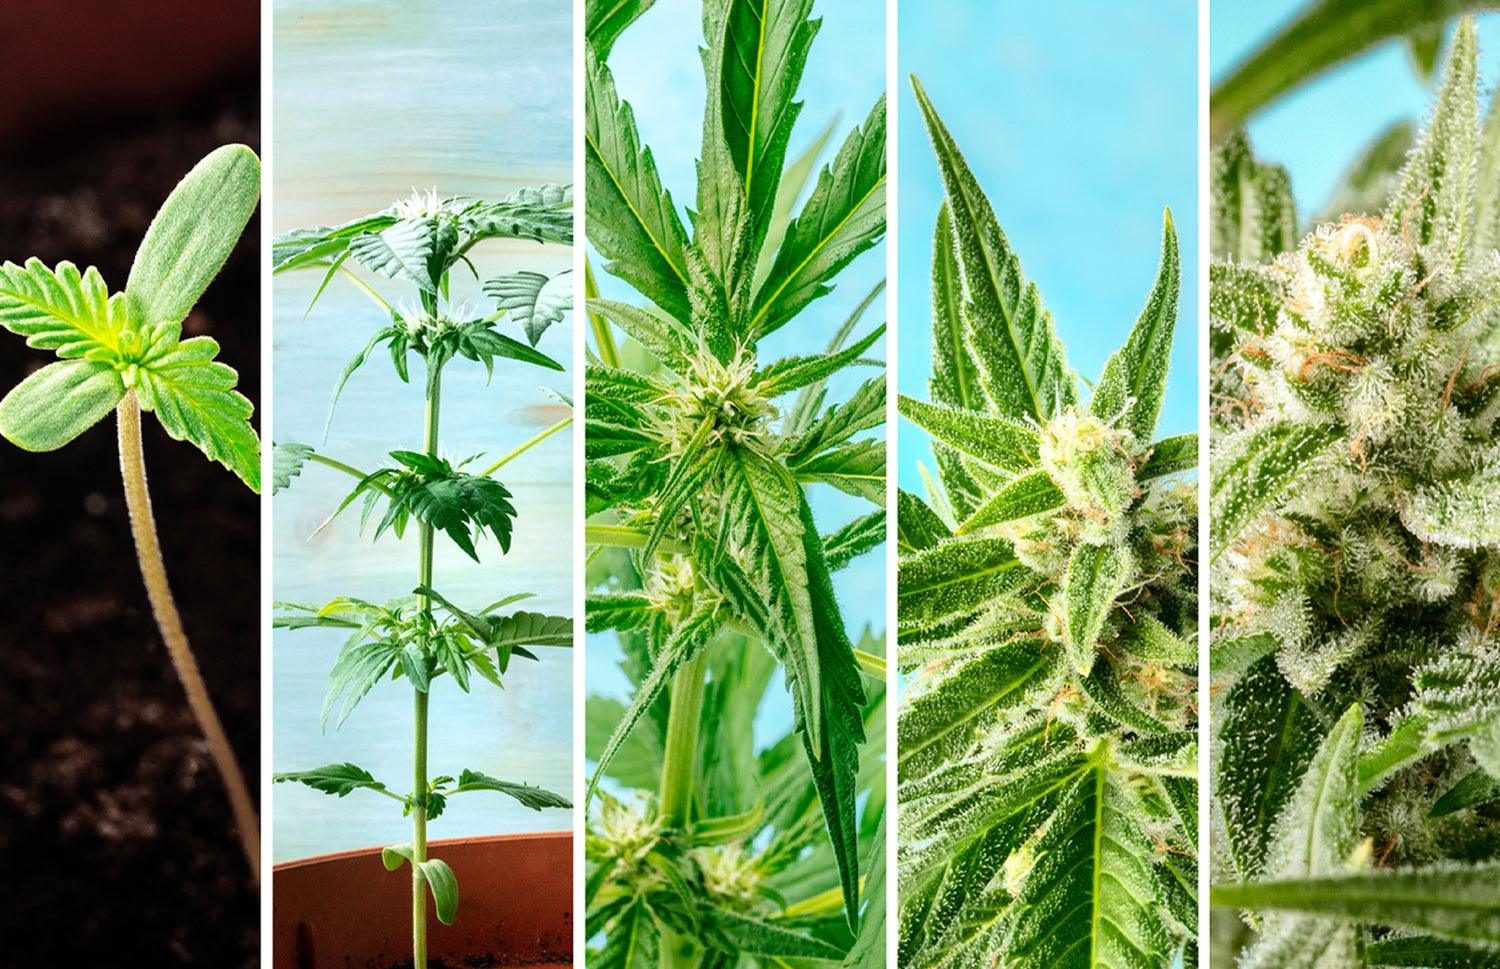 To get maximum yield from a marijuana plant, what size pot should